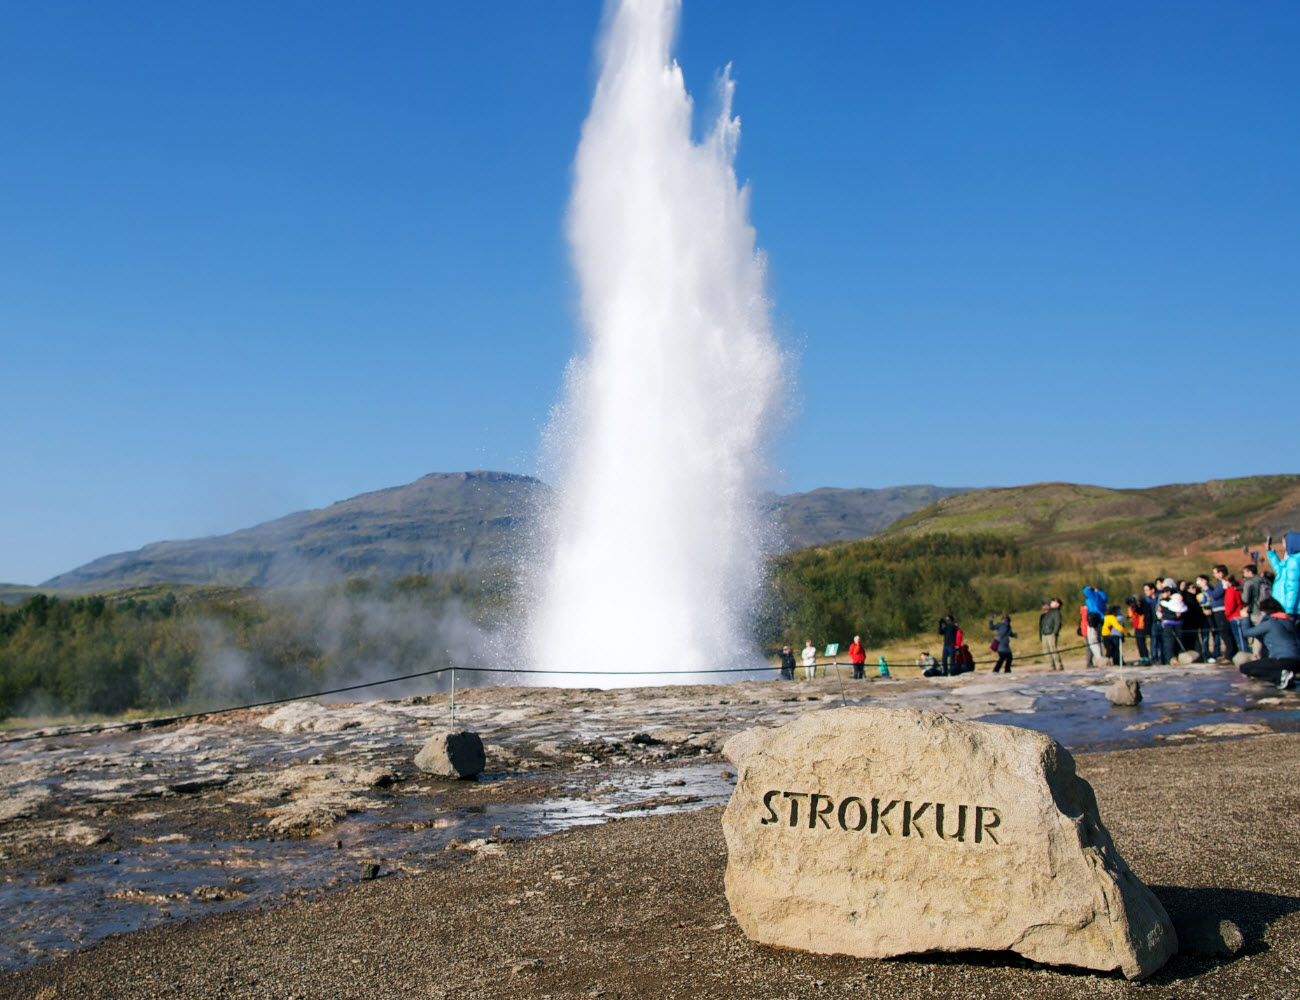 Strokkur hot springs erupts every 10 minutes